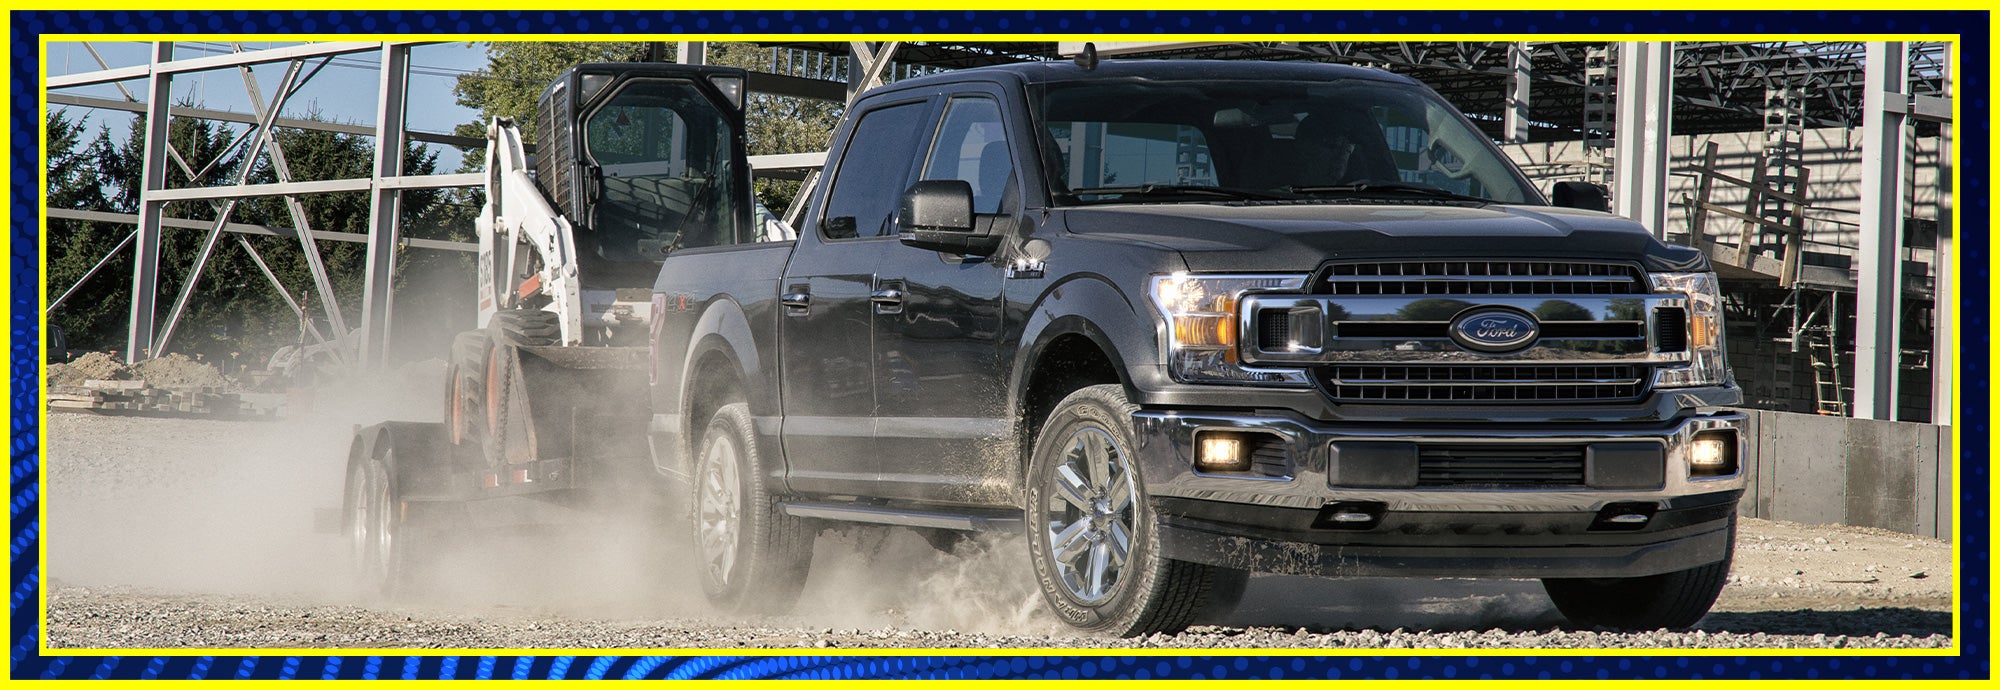 2020 Ford F-150 | Towing Capacity & More | Palmetto Ford 2020 Ford F 150 Towing Capacity 5.0 V8